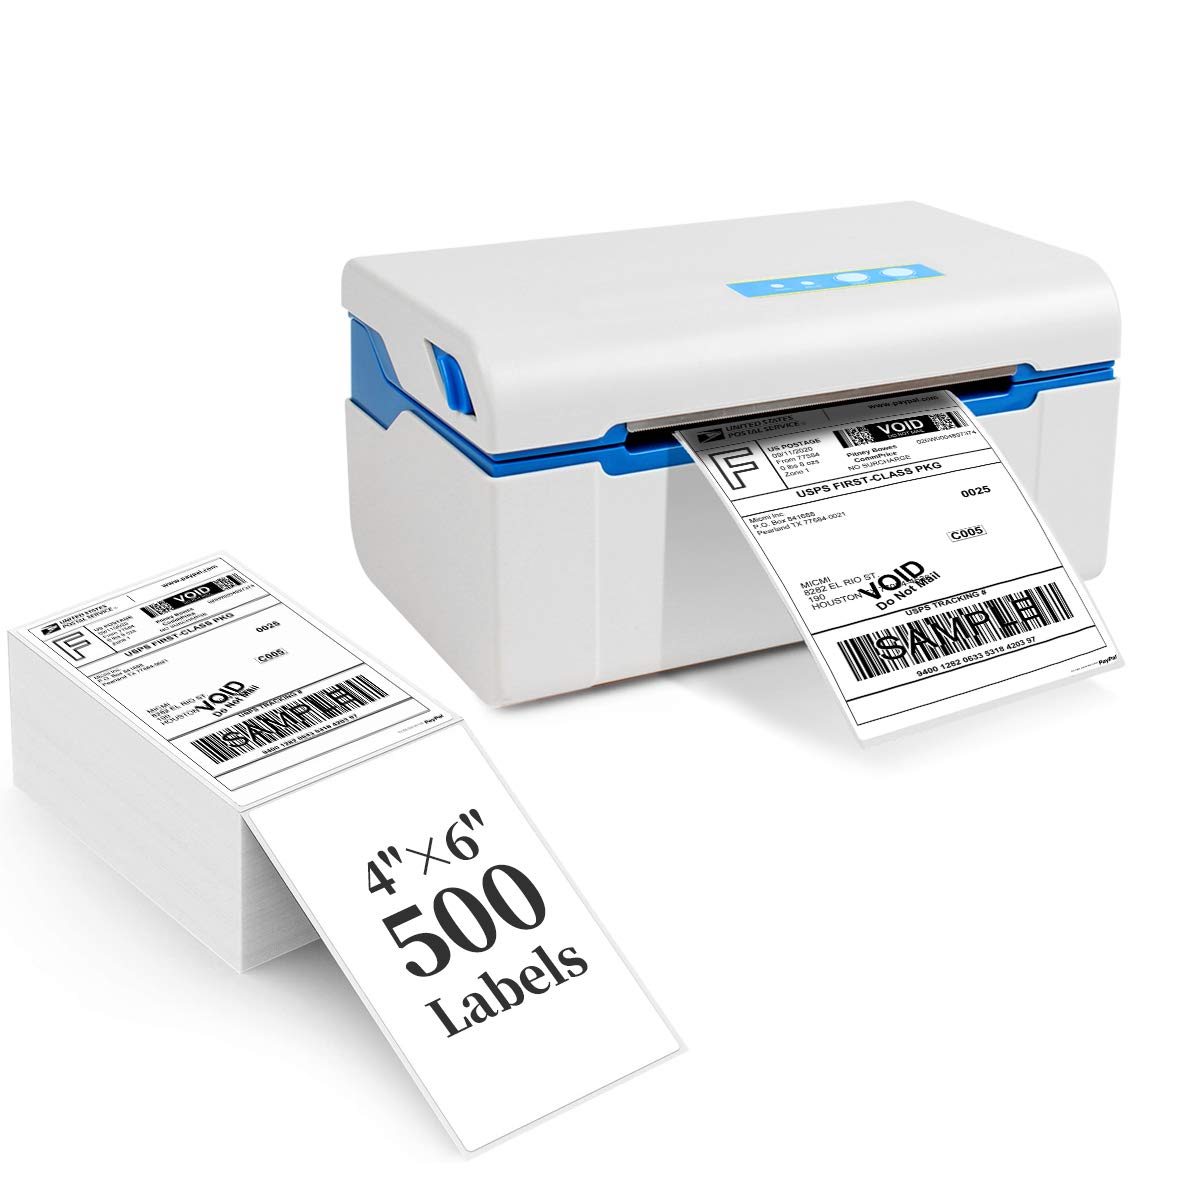 Shipping Label Printer, Micmi Commercial Direct Thermal Printer Support Amazon Ebay PayPal Etsy Shopify Shipstation Stamps.com Ups USPS FedEx DHL S...